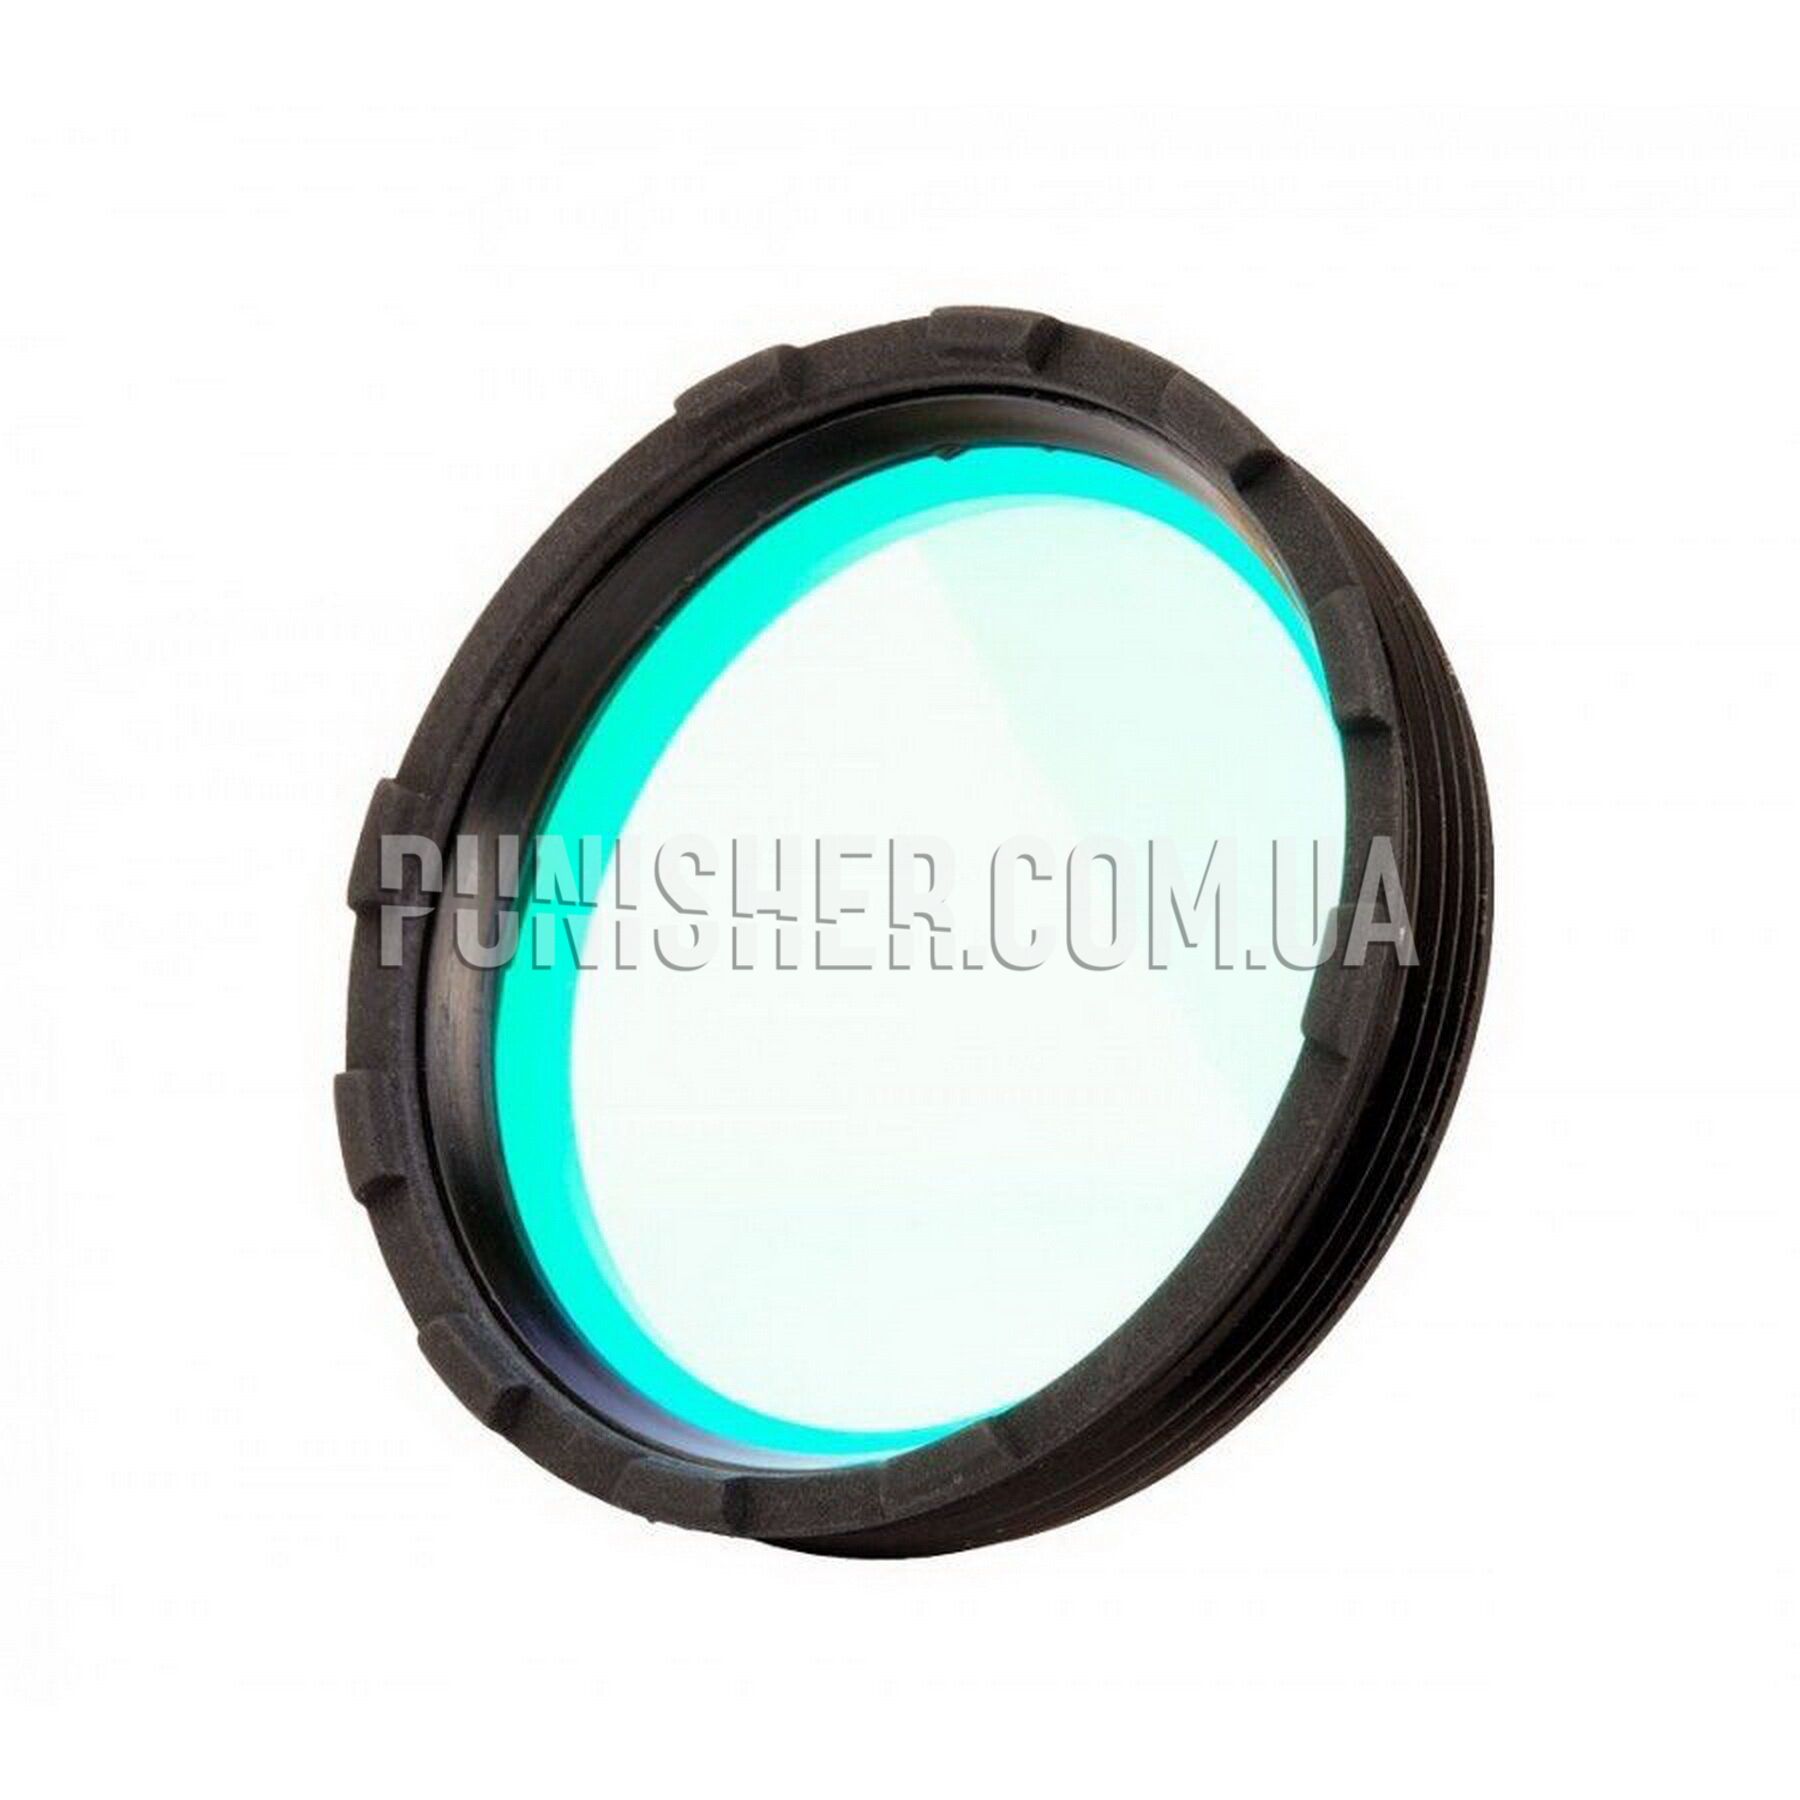 NVG LIF (Light Interference Filter) for PVS-7 and PVS-14 (Used) .